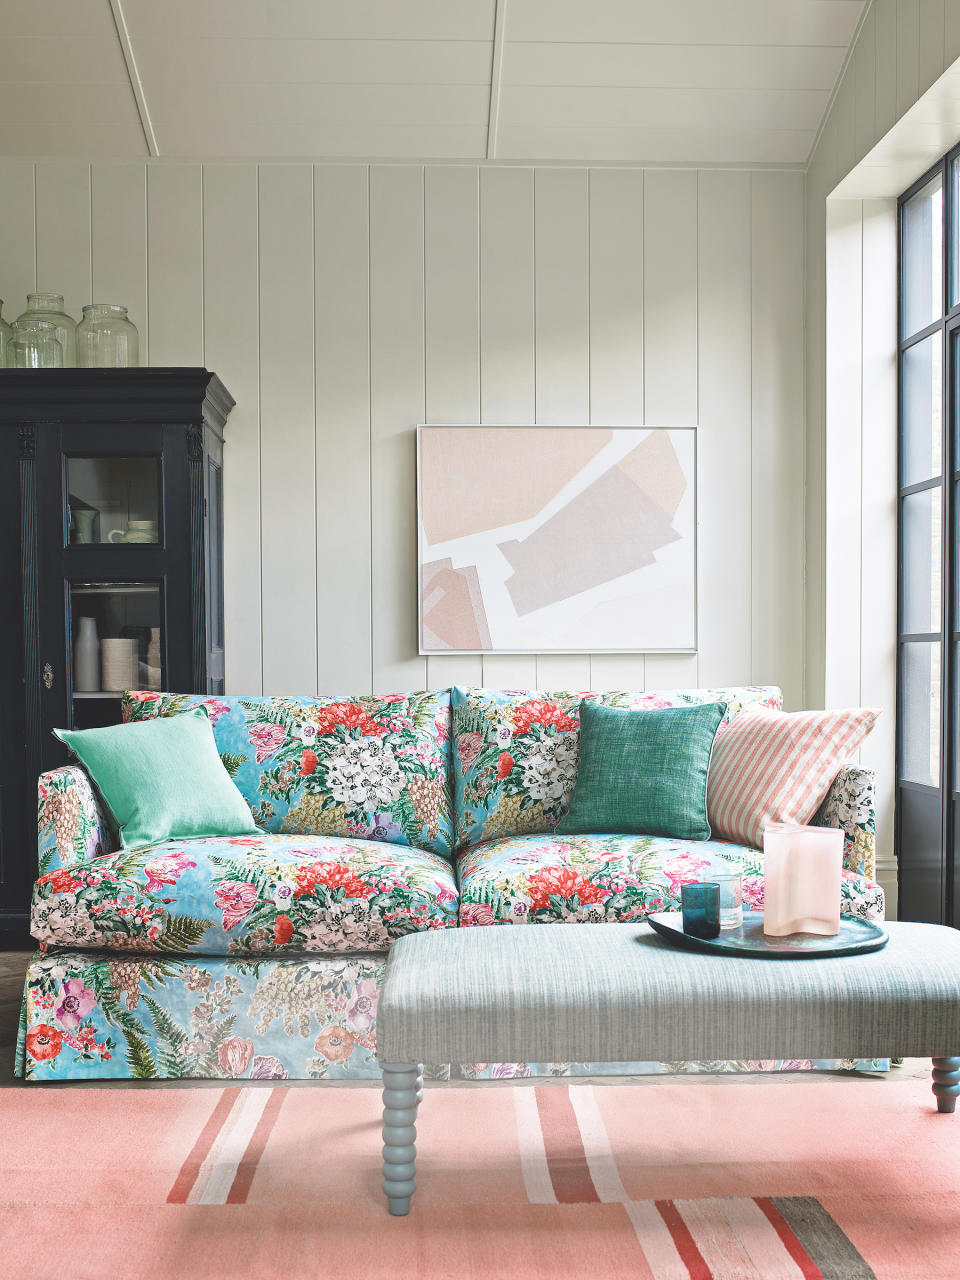 <p> Add a happy-go-lucky feel to a your farmhouse living room ideas with a bright couch &#x2013; just one easy room color idea.&#xA0; </p> <p> &apos;This is such a simple way to add personality to a simple farmhouse scheme,&apos; says Andr&#xE9;a Childs, Editor of Country Homes &amp; Interiors magazine. &apos;Choose removable slipcovers and you can update the look seasonally, introducing florals in the springtime and gold and russet tones in the fall. </p> <p> &apos;The trick to dialling up color is simply to choose a shade or two brighter or stronger than your usual farmhouse palette. Root the colors in nature and you won&apos;t go wrong.&apos; </p>